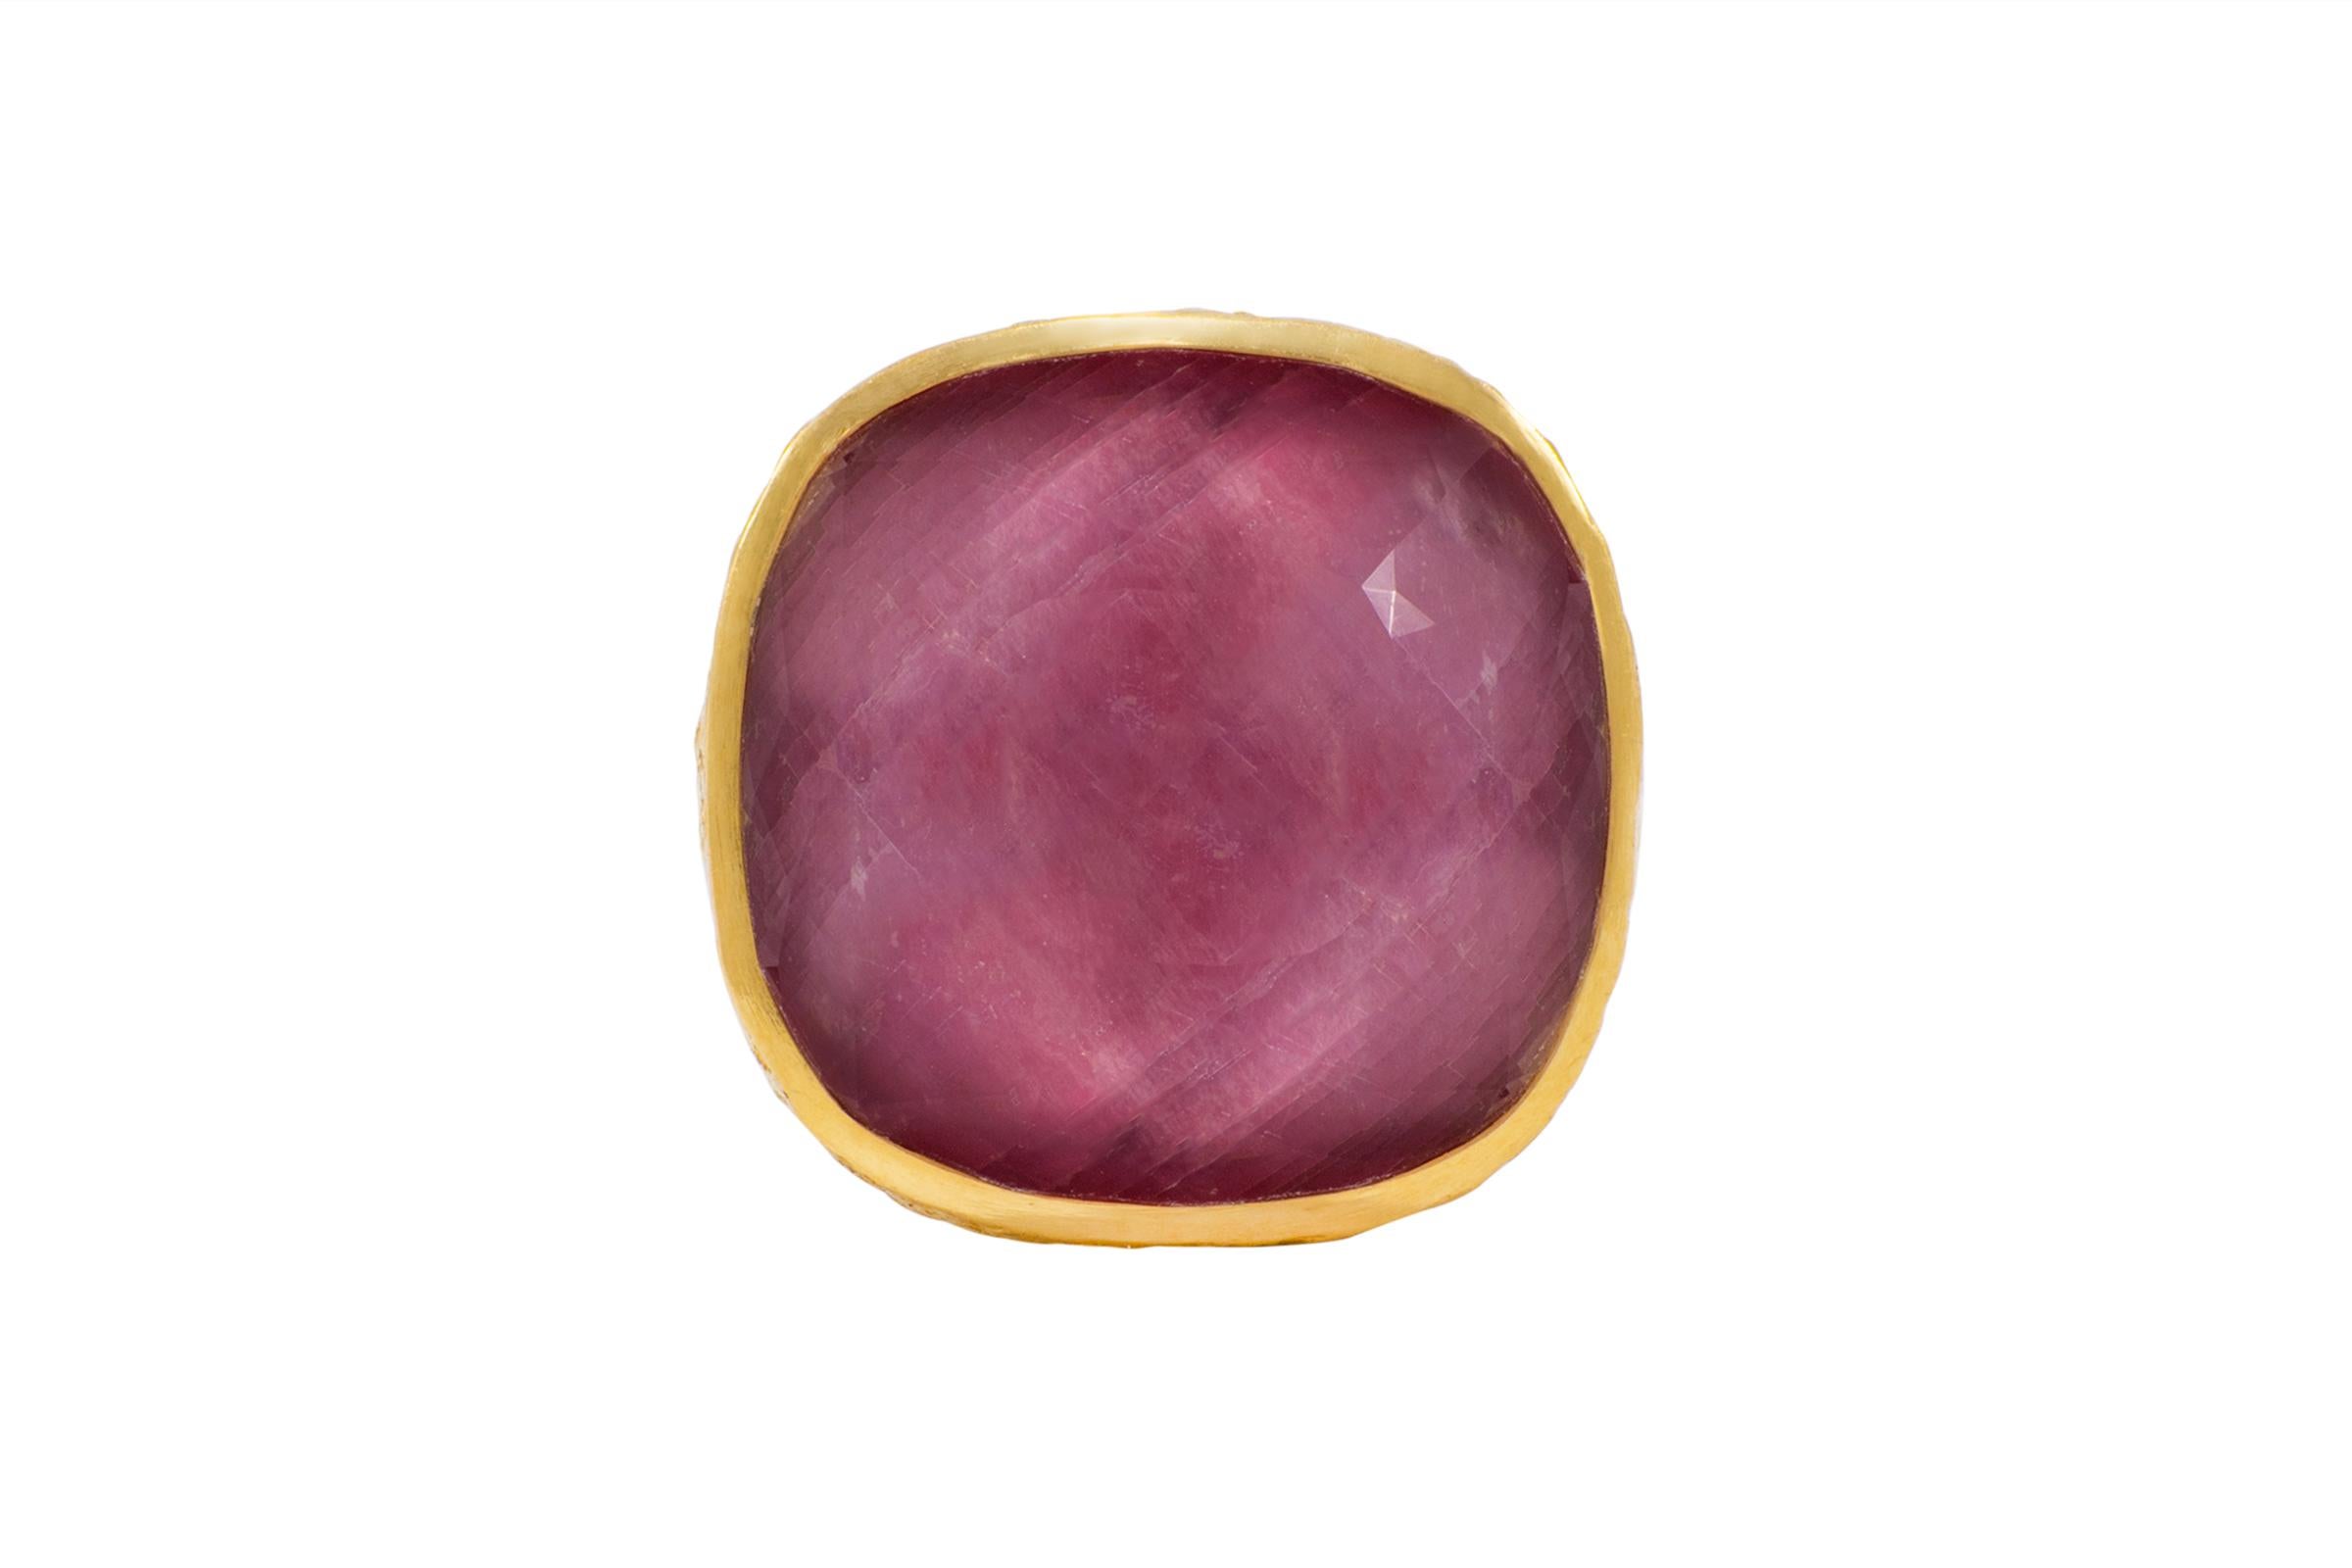 Mystical Red Corundum and Crystal Cocktail Ring in 22k Gold, by Tagili For Sale